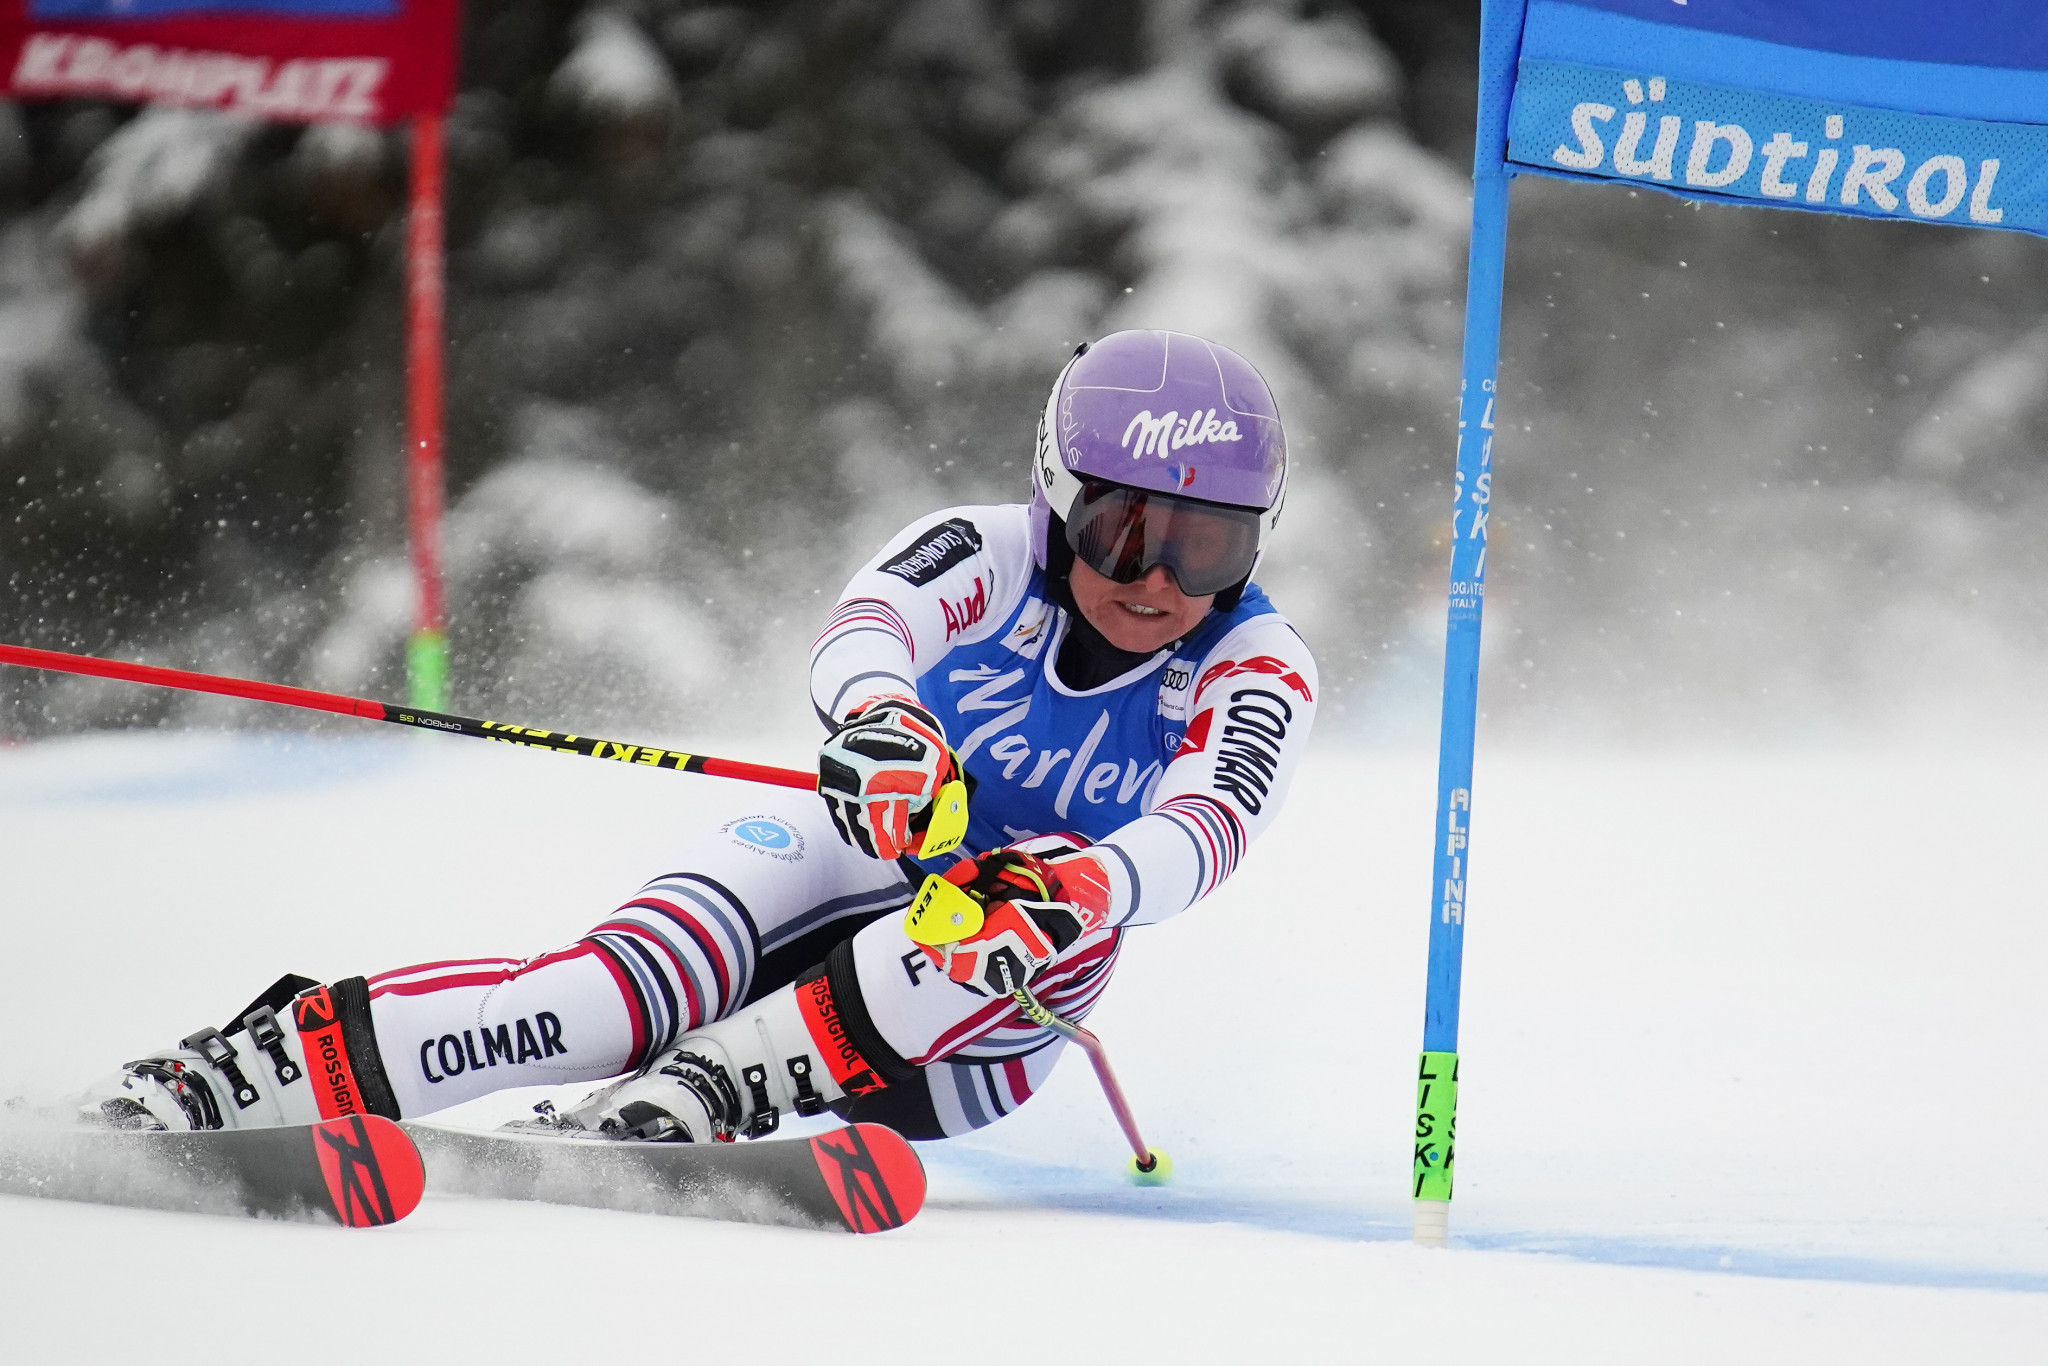 Tessa Worley has three top-three finishes in Alpine Ski World Cup giant slalom races this season ©Getty Images